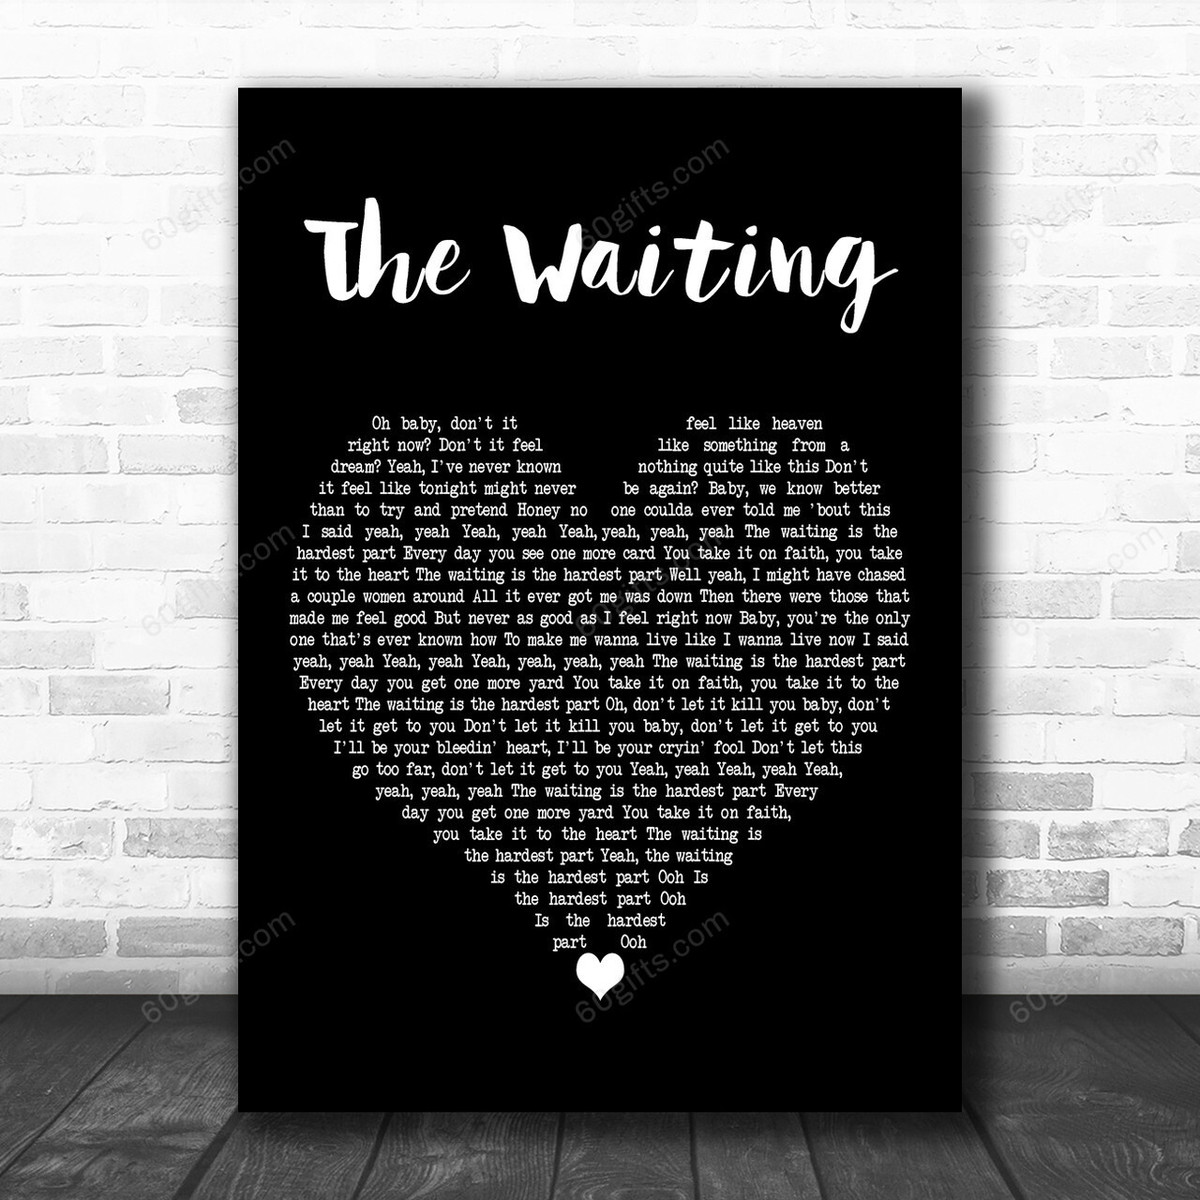 Tom Petty and the Heartbreakers The Waiting Black Heart Decorative Art Gift Song Lyric Print - Canvas Print Wall Art Home Decor